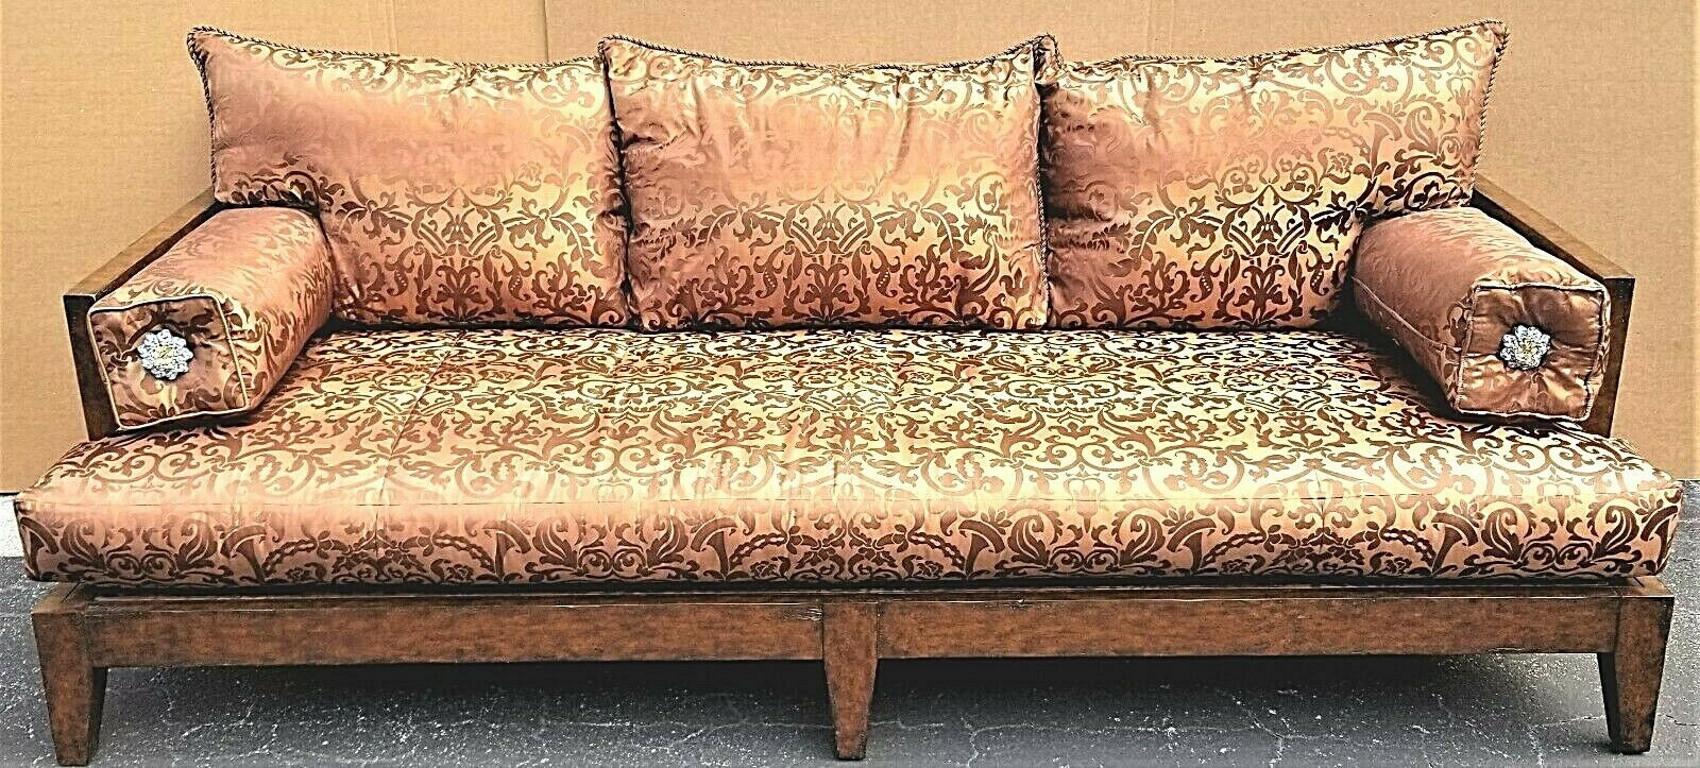 For FULL item description be sure to click on CONTINUE READING at the bottom of this listing.

Offering One Of Our Recent Palm Beach Estate Fine Furniture Acquisitions Of A 
Wonderful MARGE CARSON Asian Chinoiserie Brocade Pattern Solid Wood Sofa